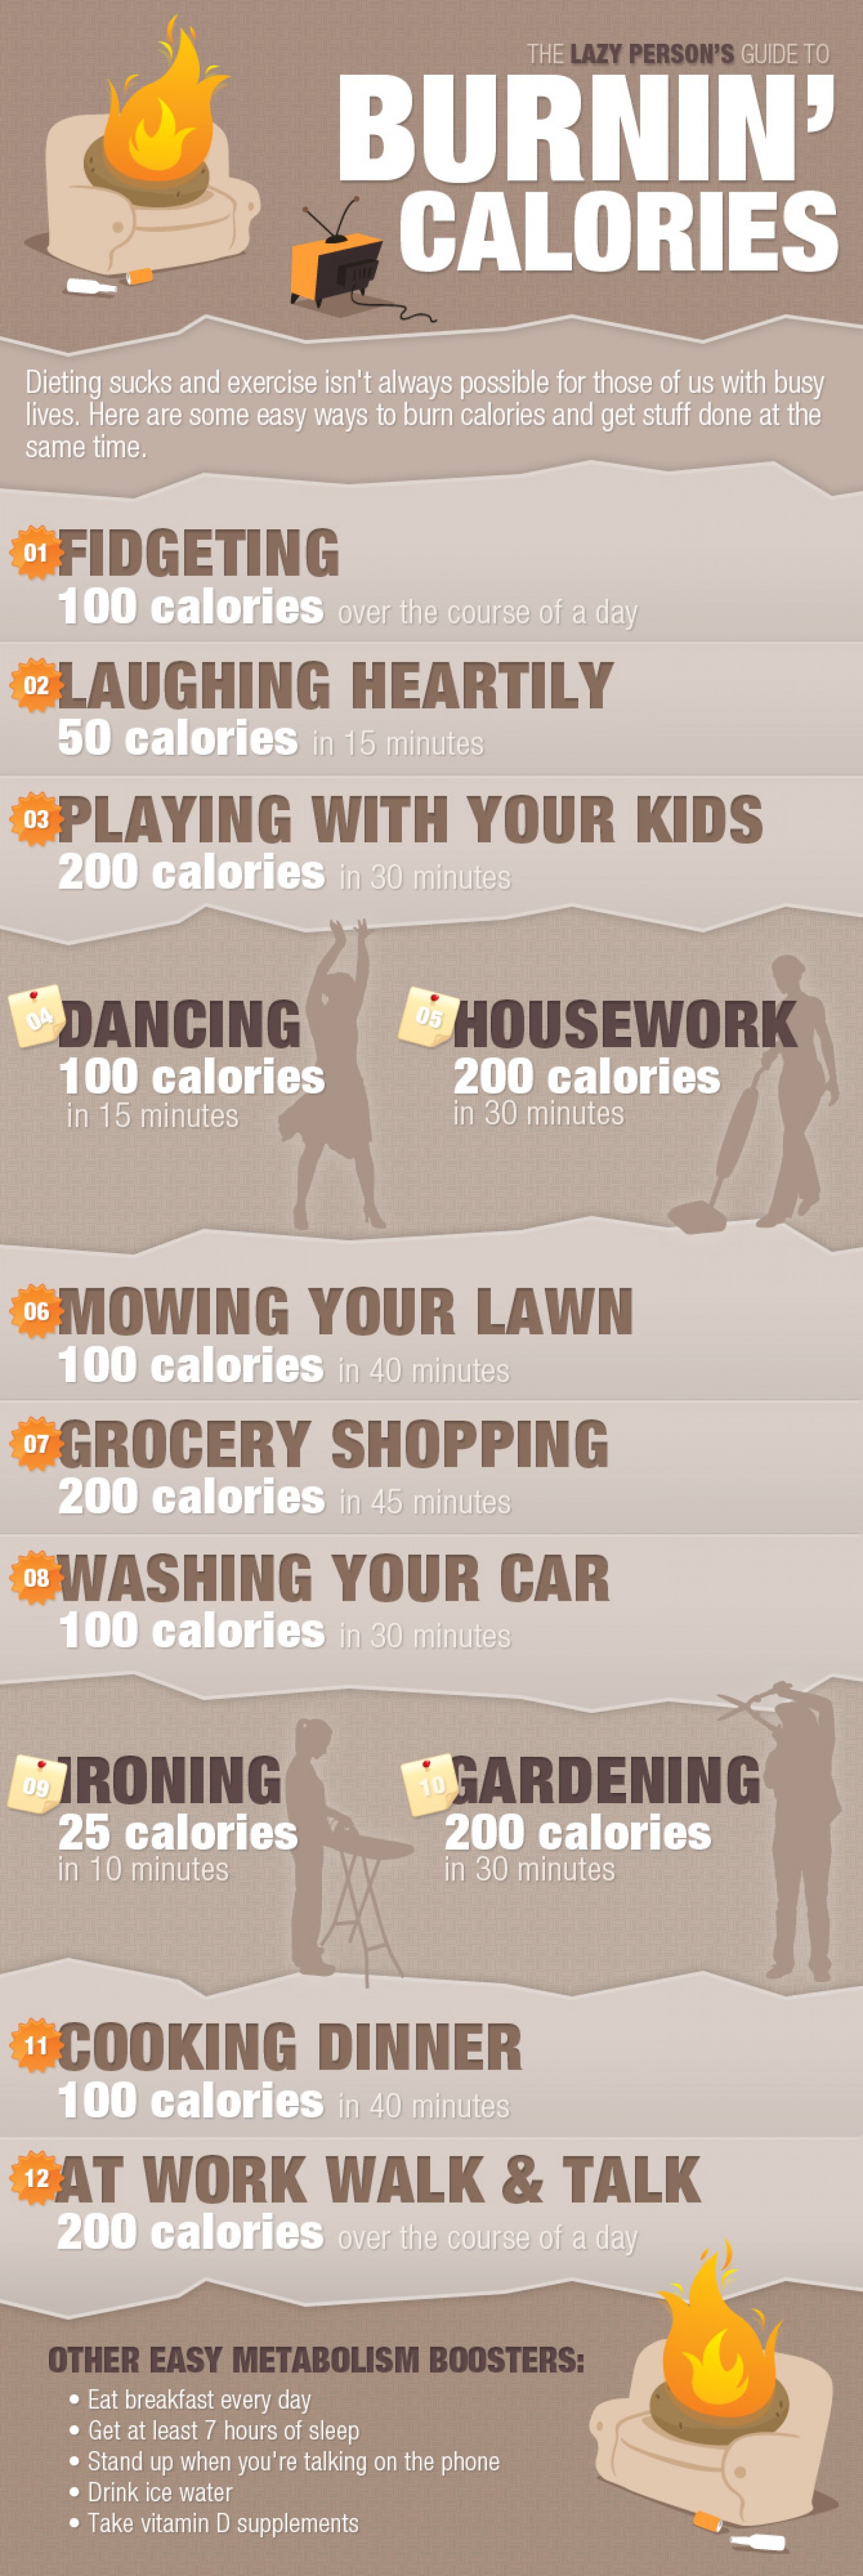 lazy-persons-guide-to-burning-calories_5029186cc1e1d_w1500